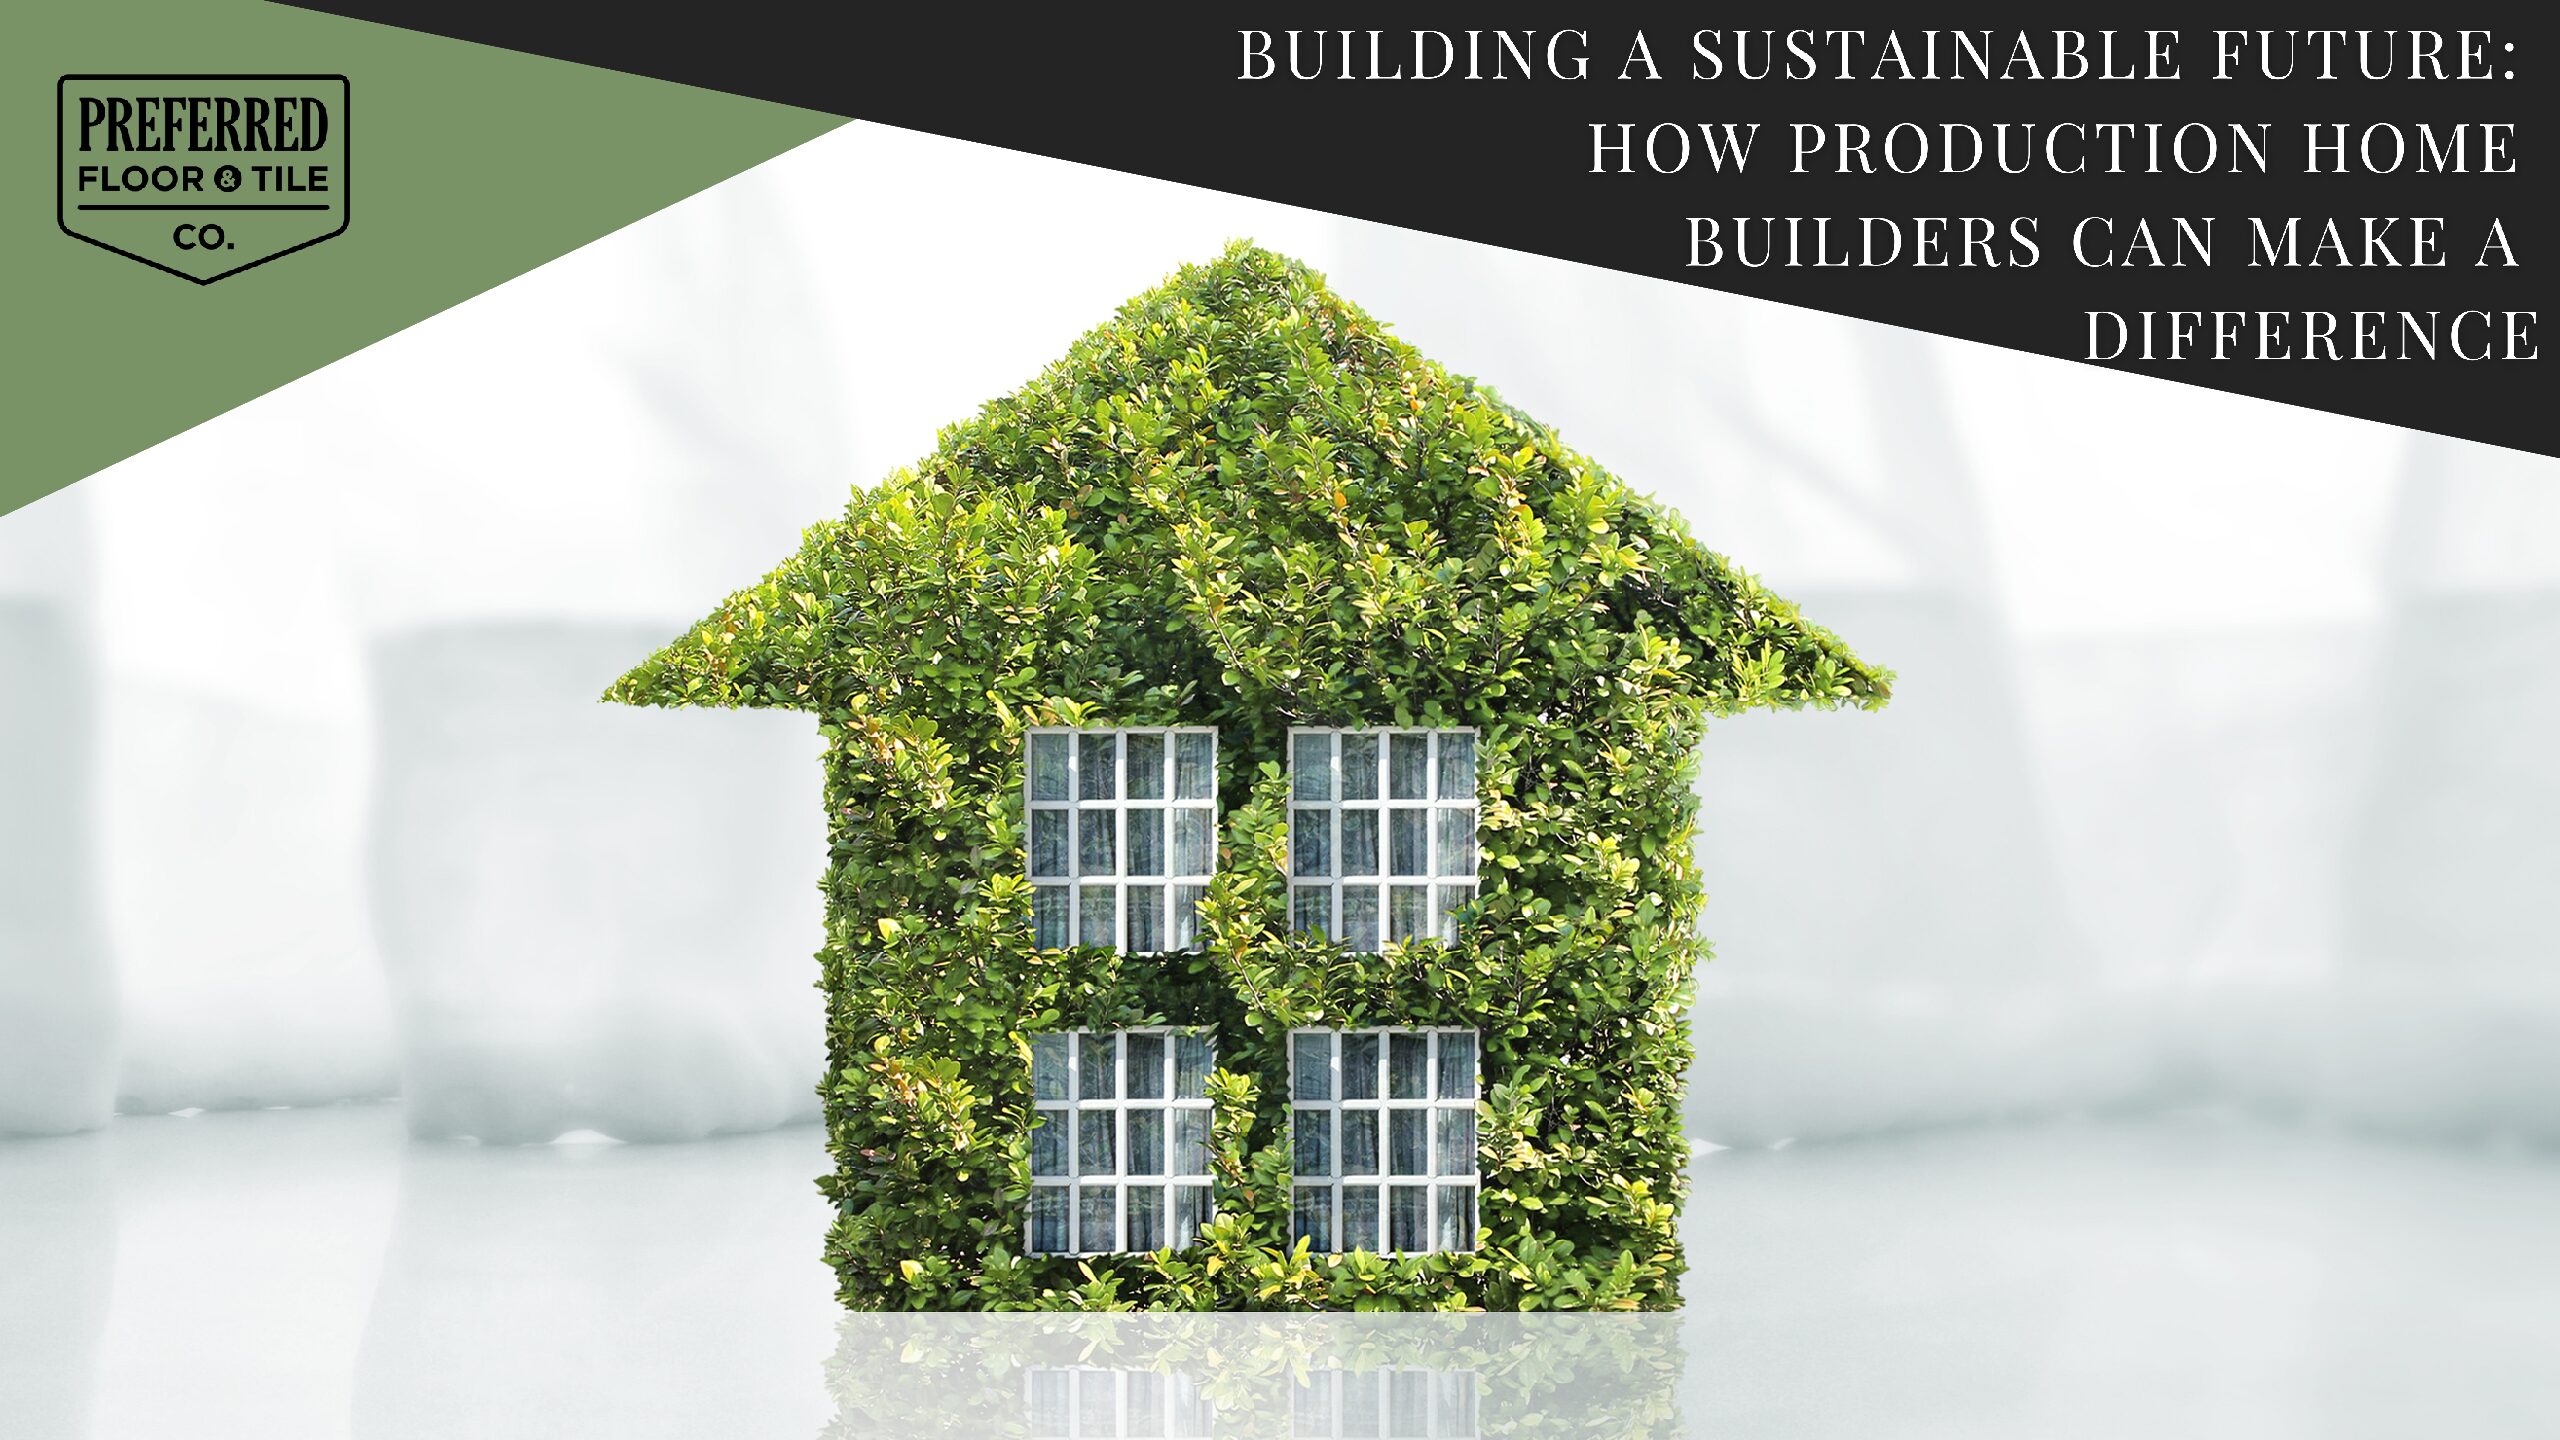 Building a Sustainable Future: How Production Home Builders Can Make a Difference